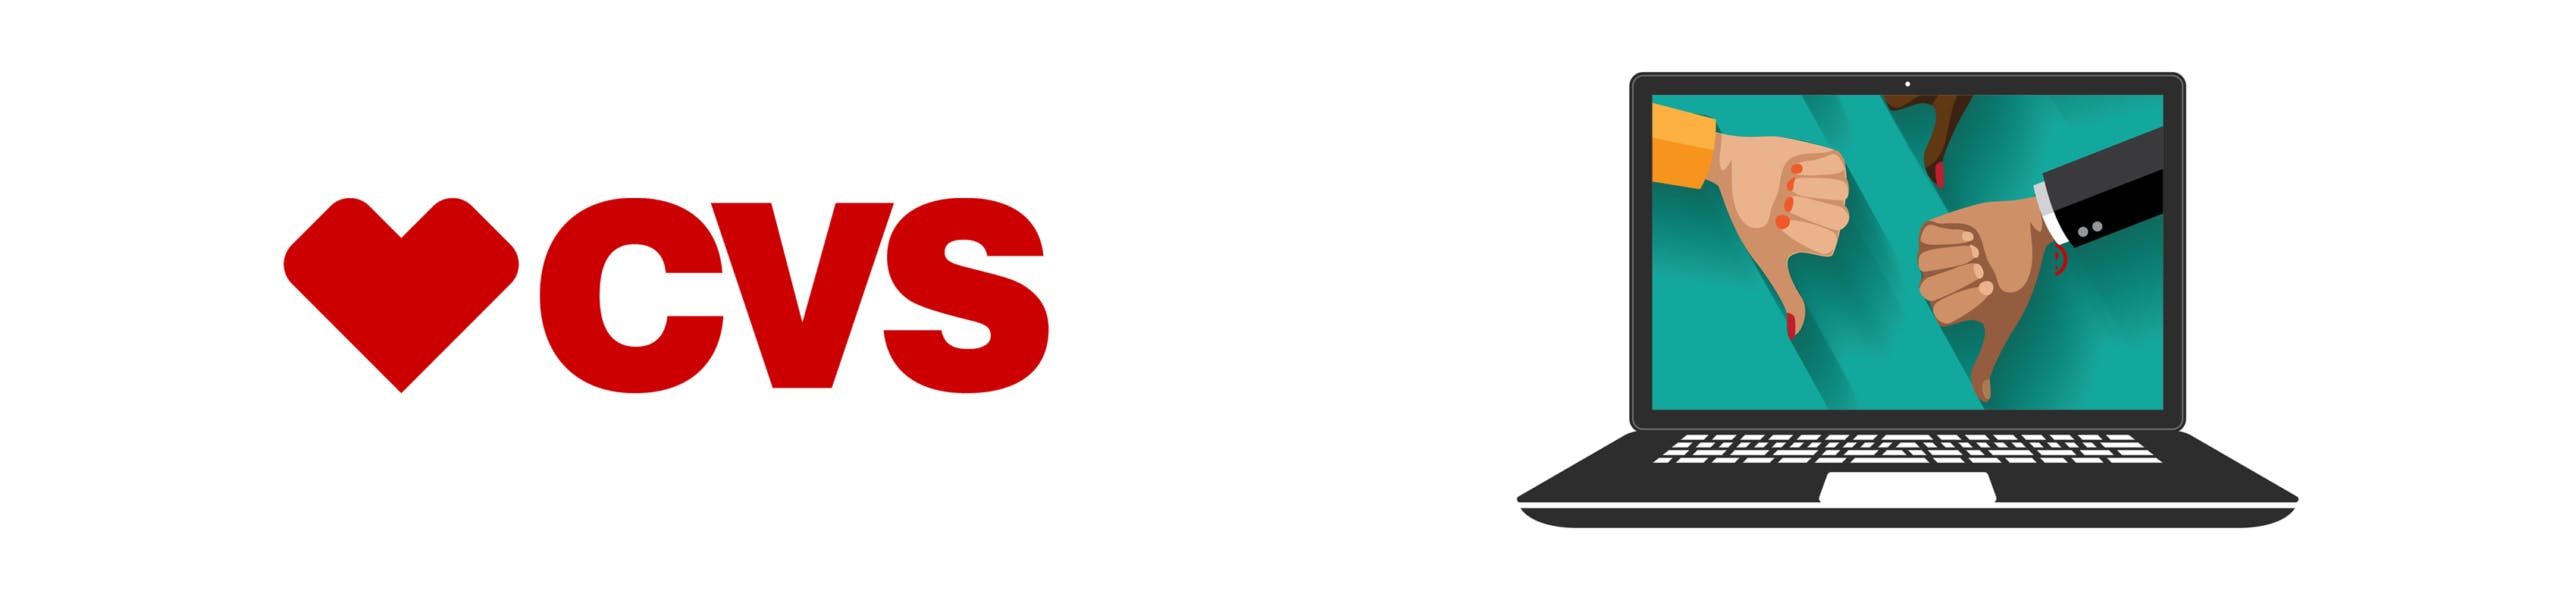 CVS logo next to a laptop with thumbs pointing down